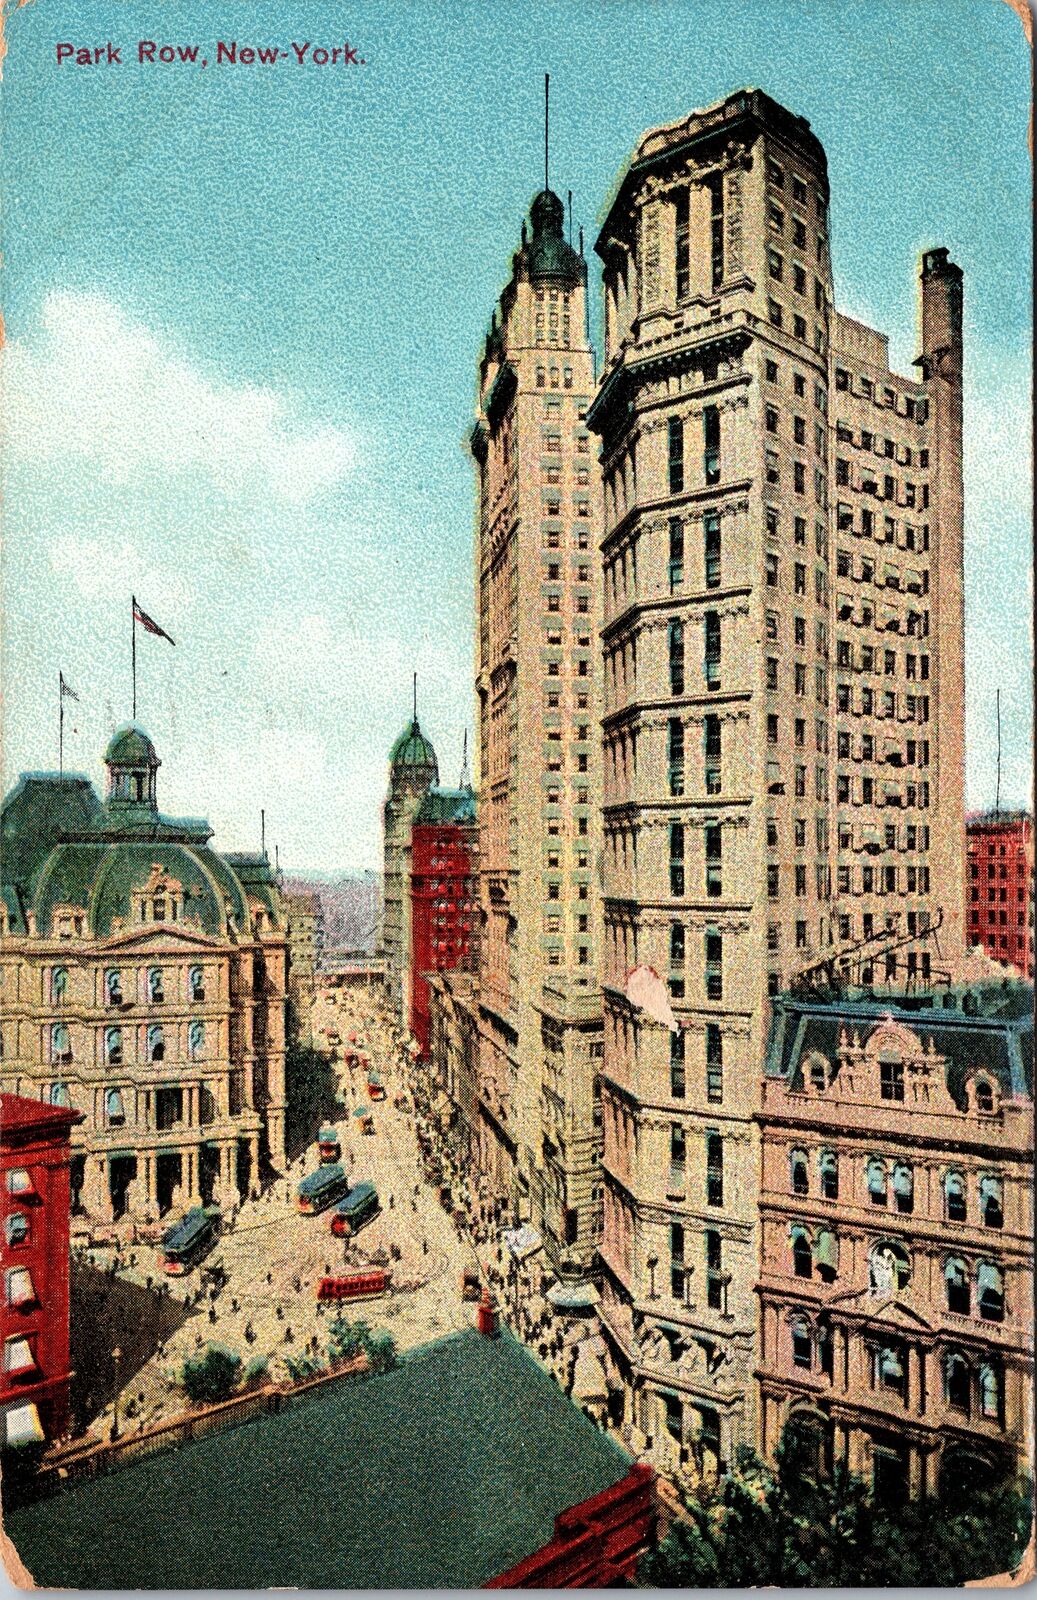 VINTAGE POSTCARD PARK ROW AND STREET VIEW NEW YORK CITY POSTED 1909 (HAND-COLOR)